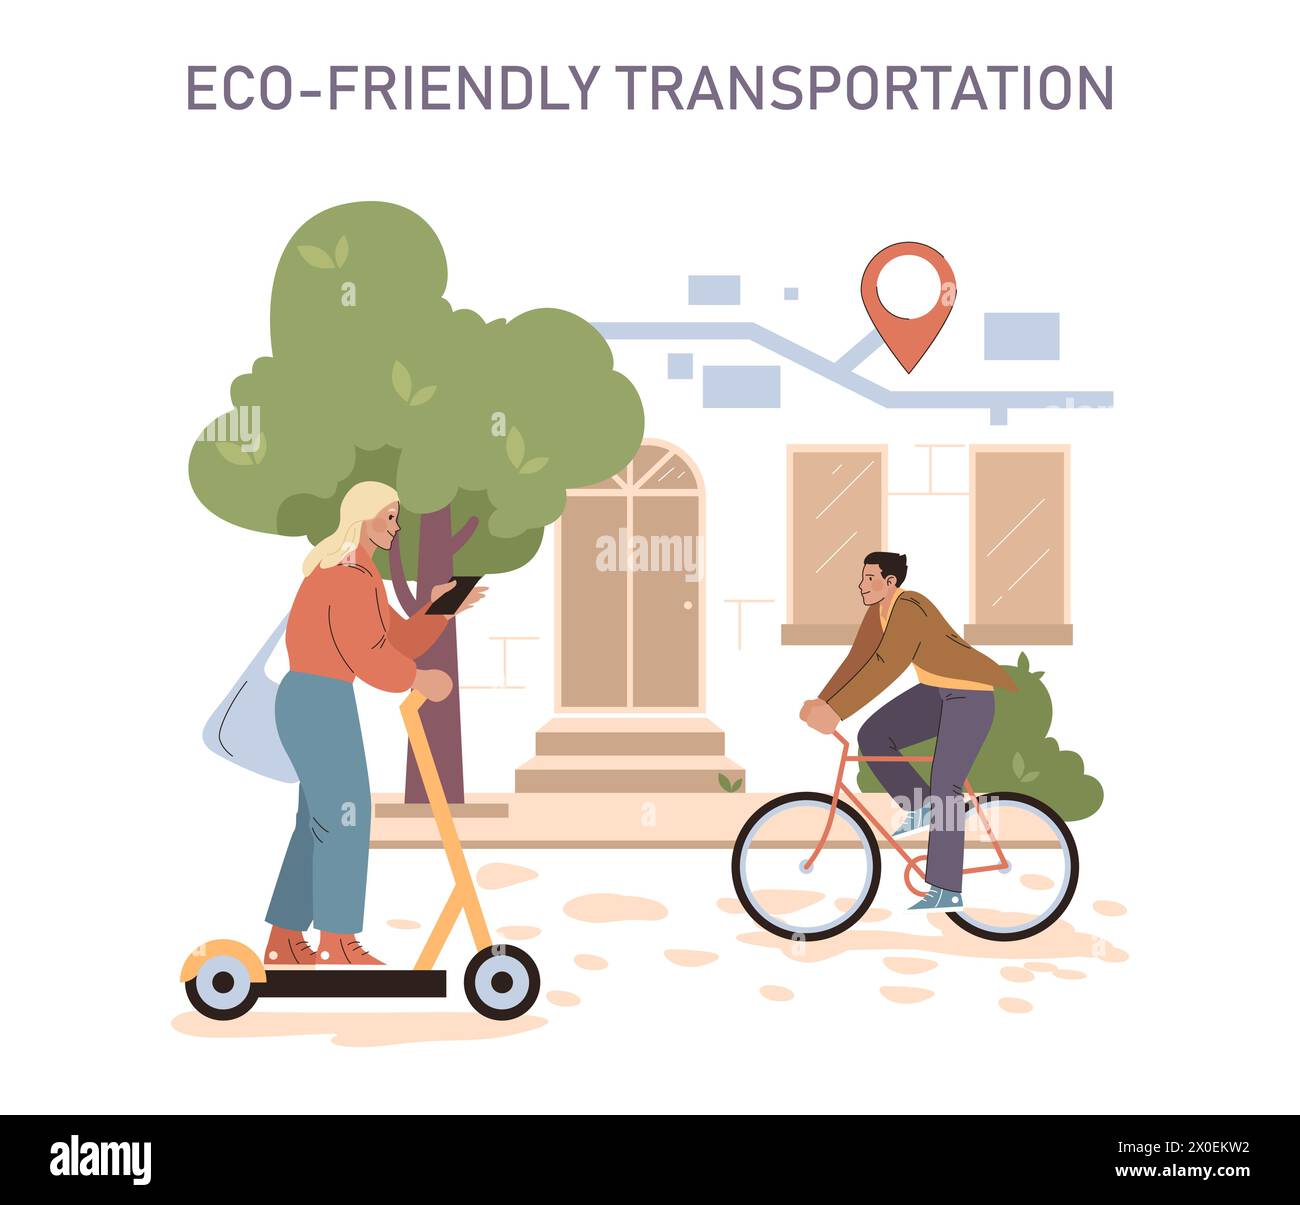 Eco-Friendly Transportation set. Urban commuters using sustainable transport options. Woman on electric scooter and man on bicycle. Clean travel solutions in a city environment. Stock Vector